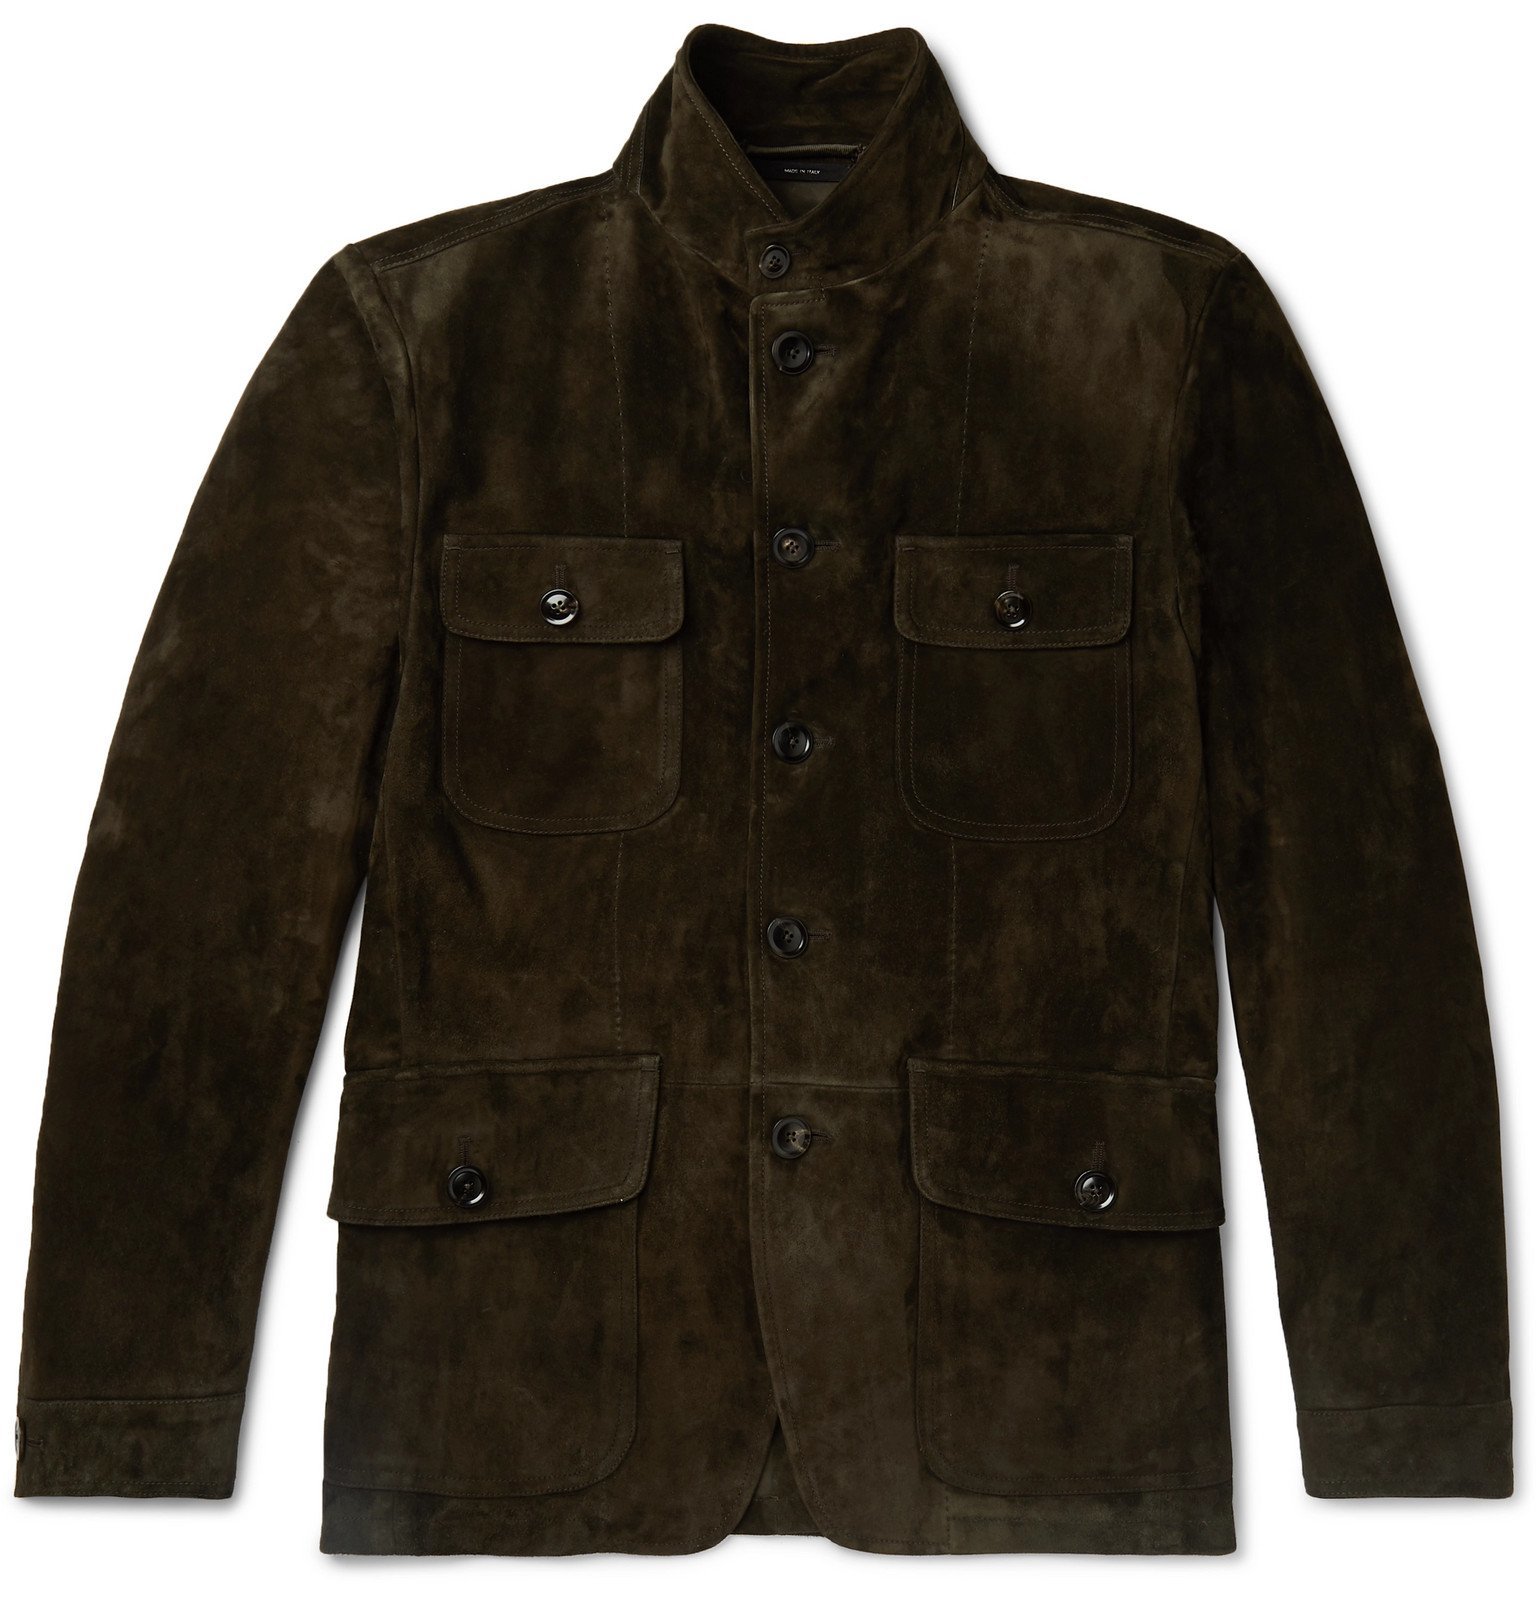 TOM FORD - Suede Field Jacket - Brown TOM FORD